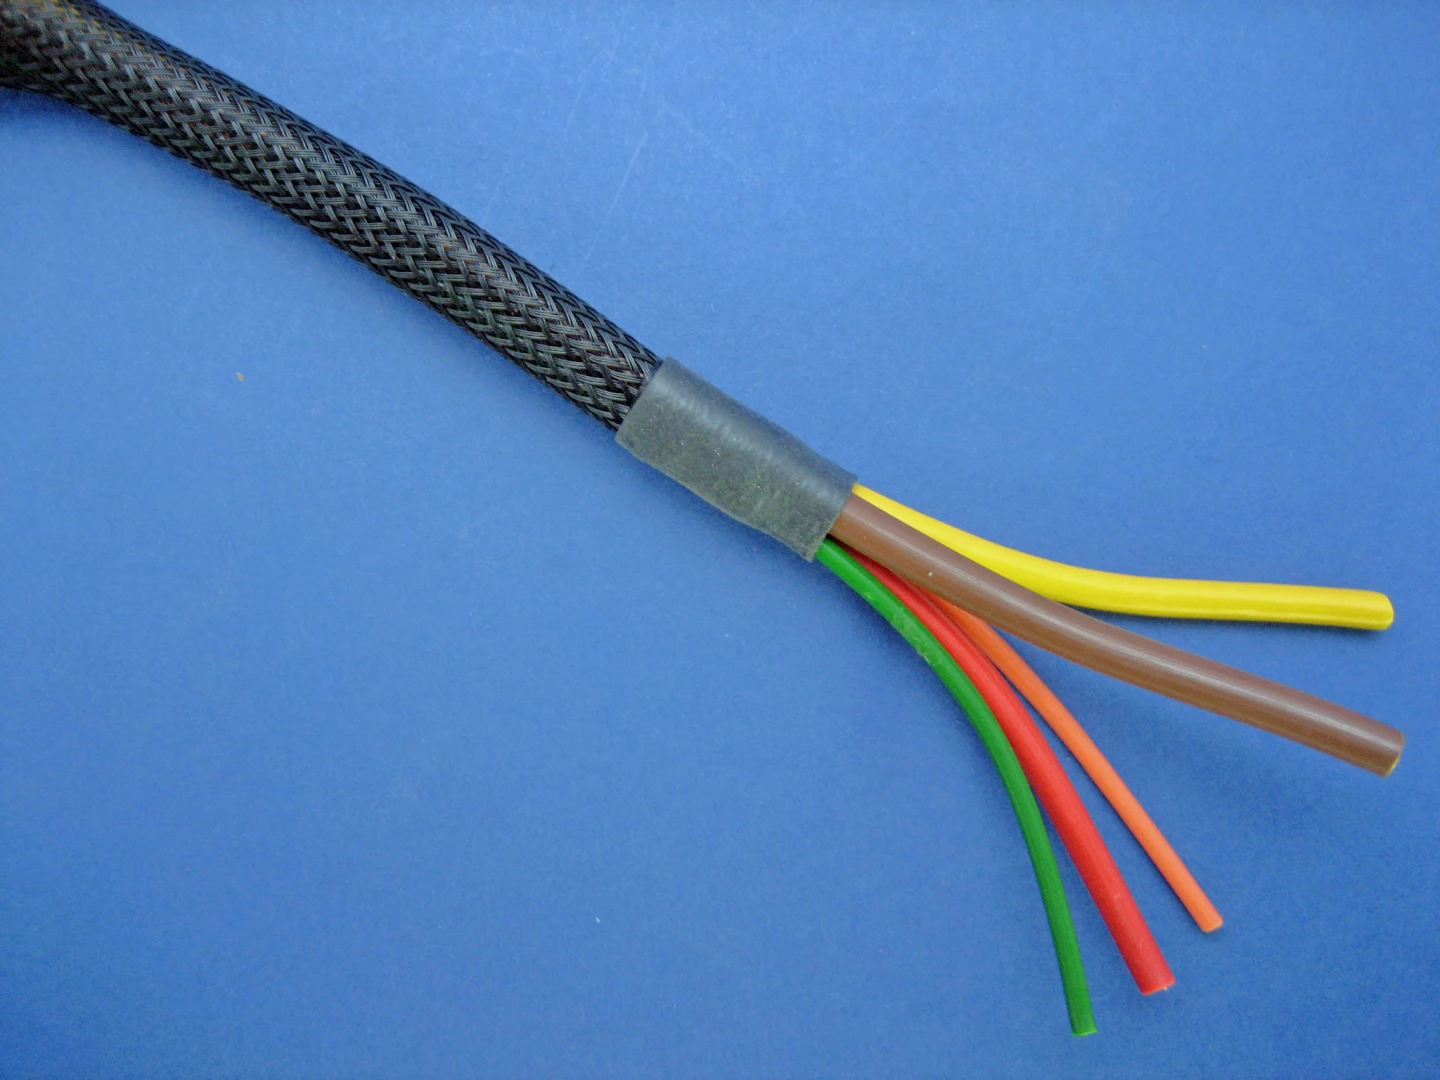 Multicolor Braided Expandable Sleeve for Wiring Harness Wire Cover